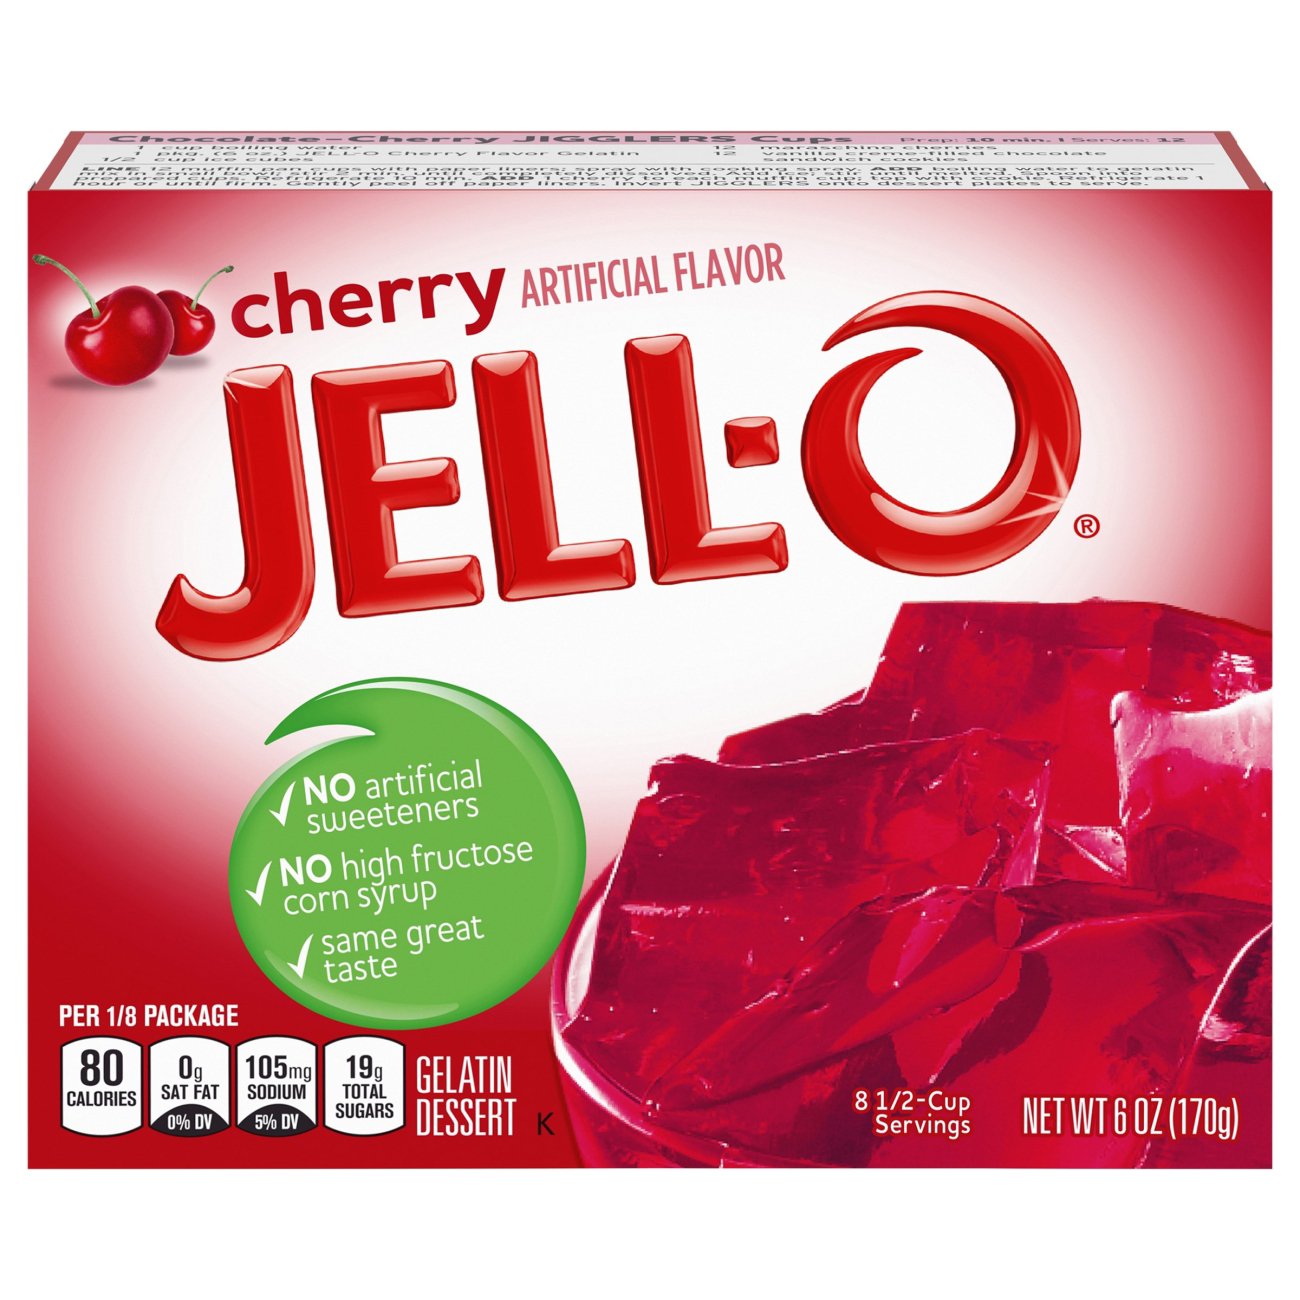 JELL-O Berry Blue Gelatin Dessert Mix (3 oz Boxes, Pack of 6)